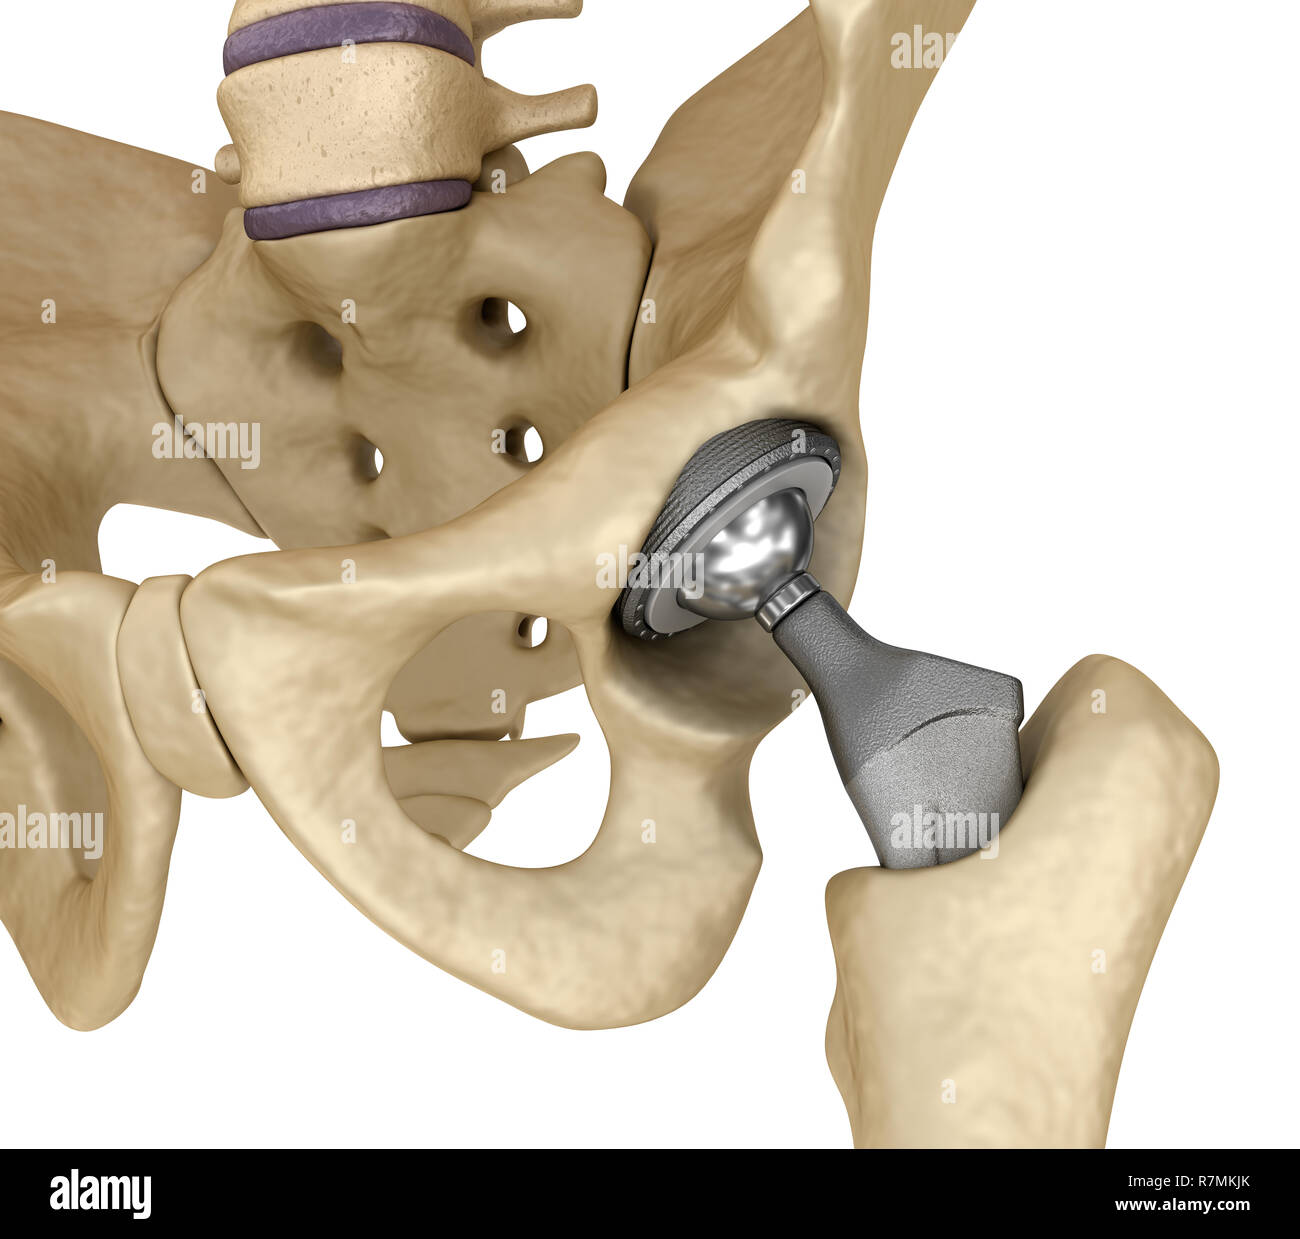 Hip replacement implant installed in the pelvis bone. Medically accurate 3D illustration Stock Photo